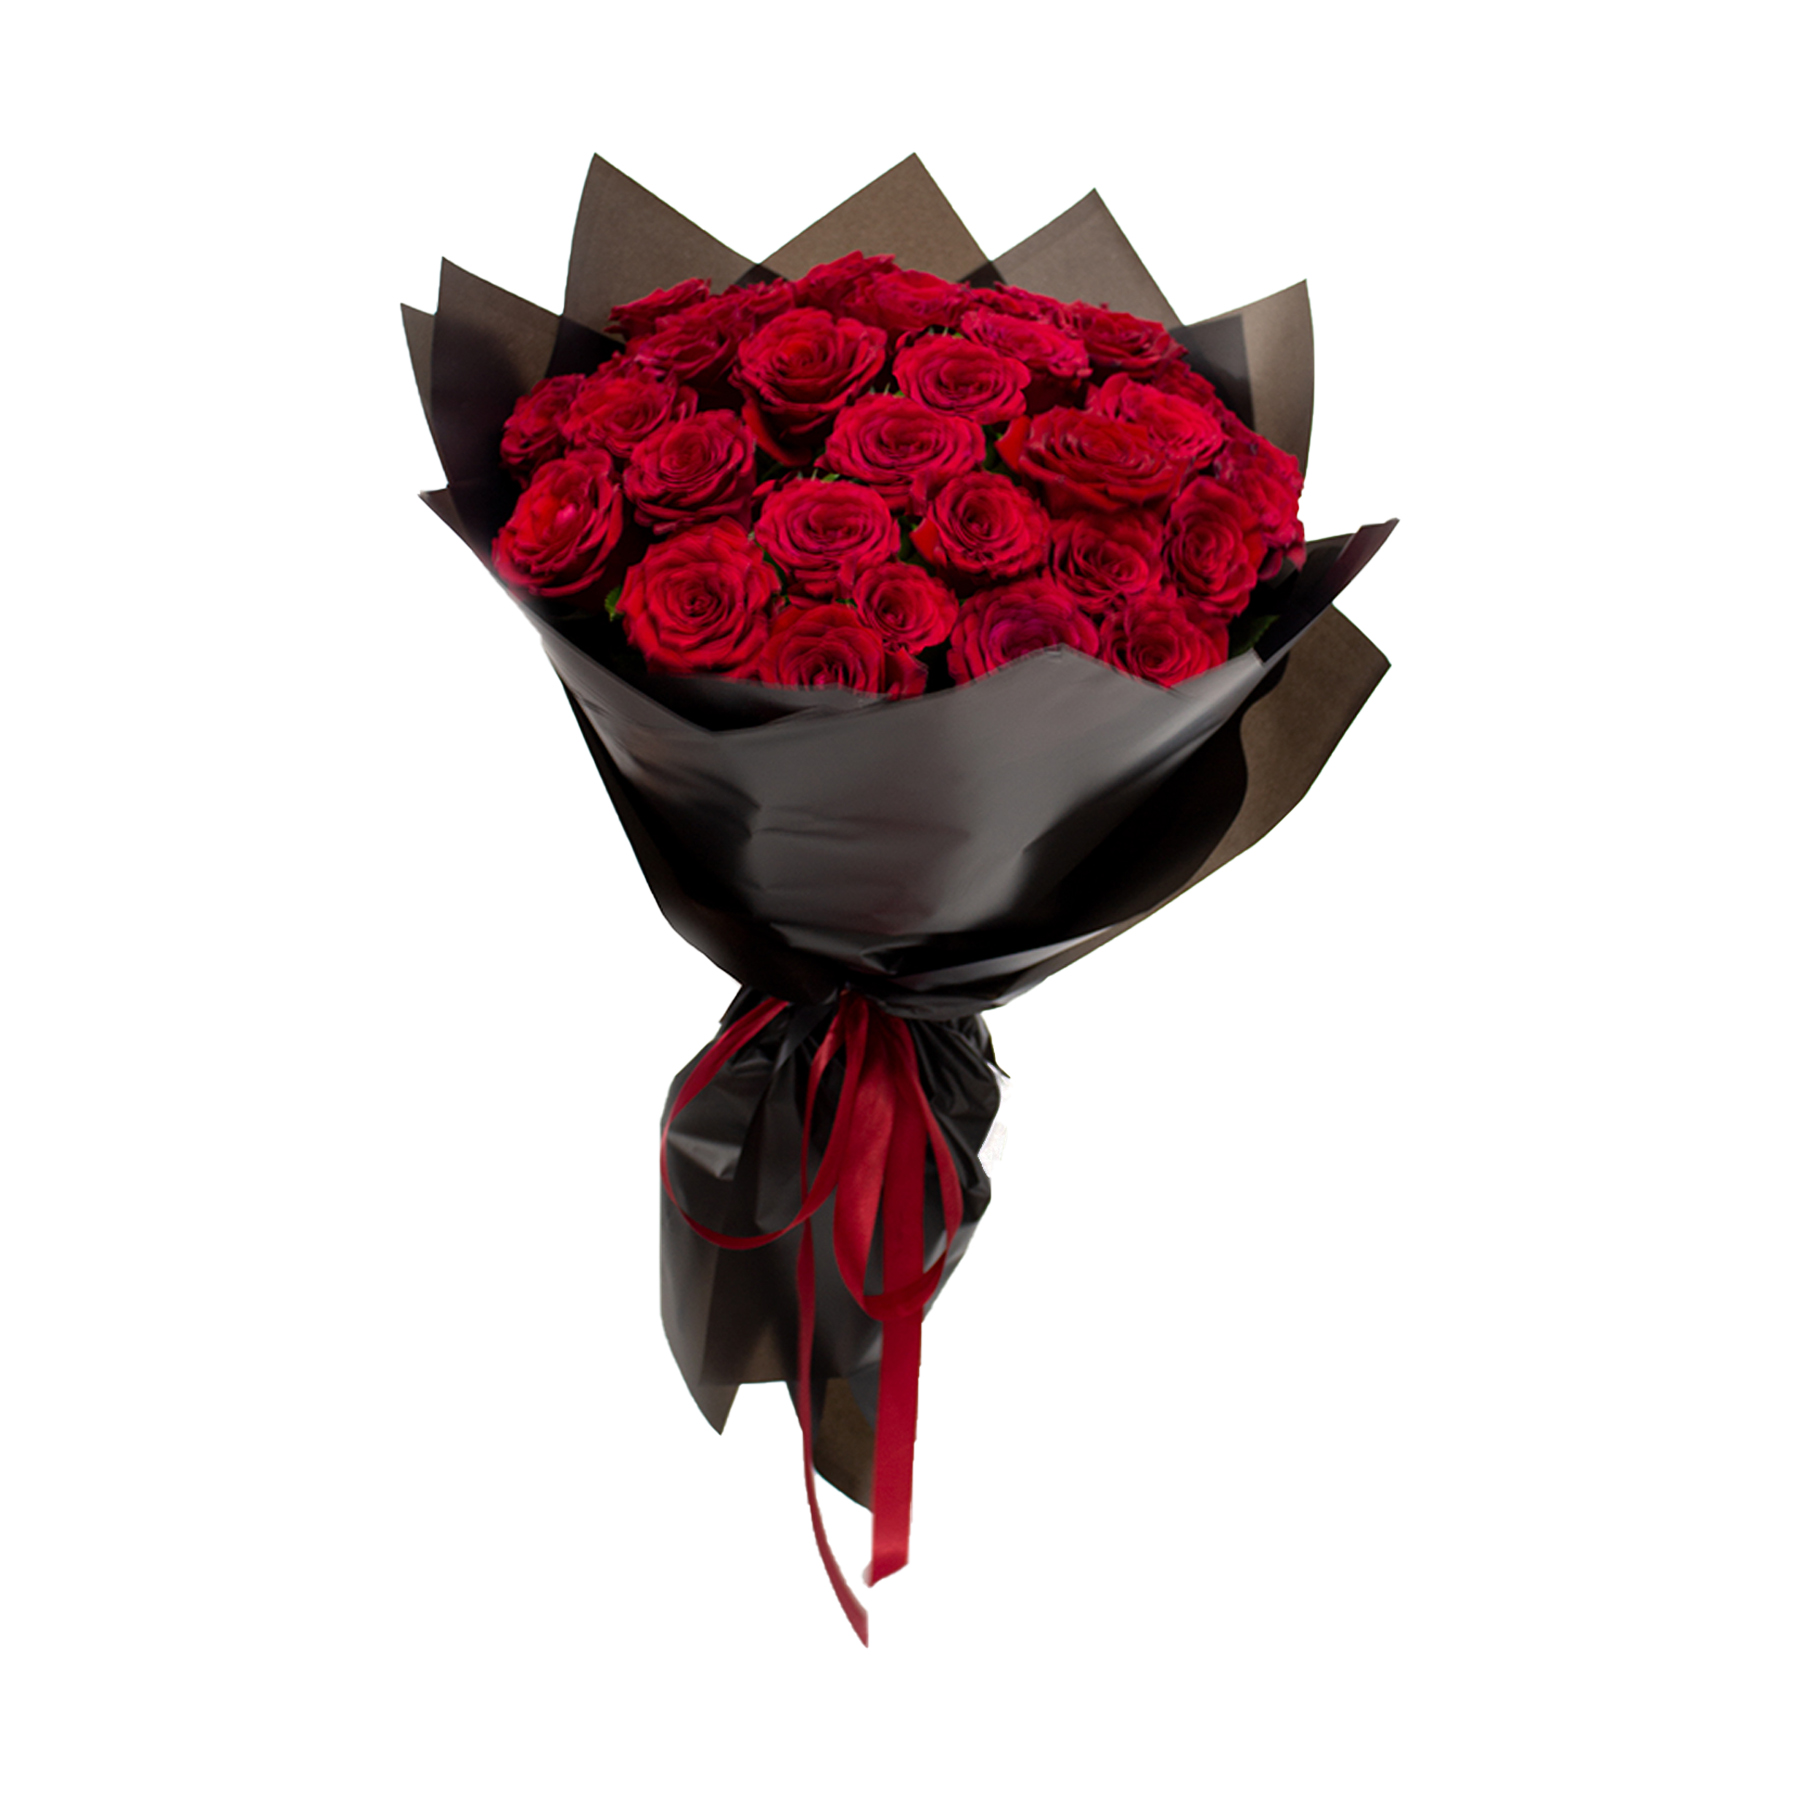 bouquet-of-red-roses-30-pcs-1